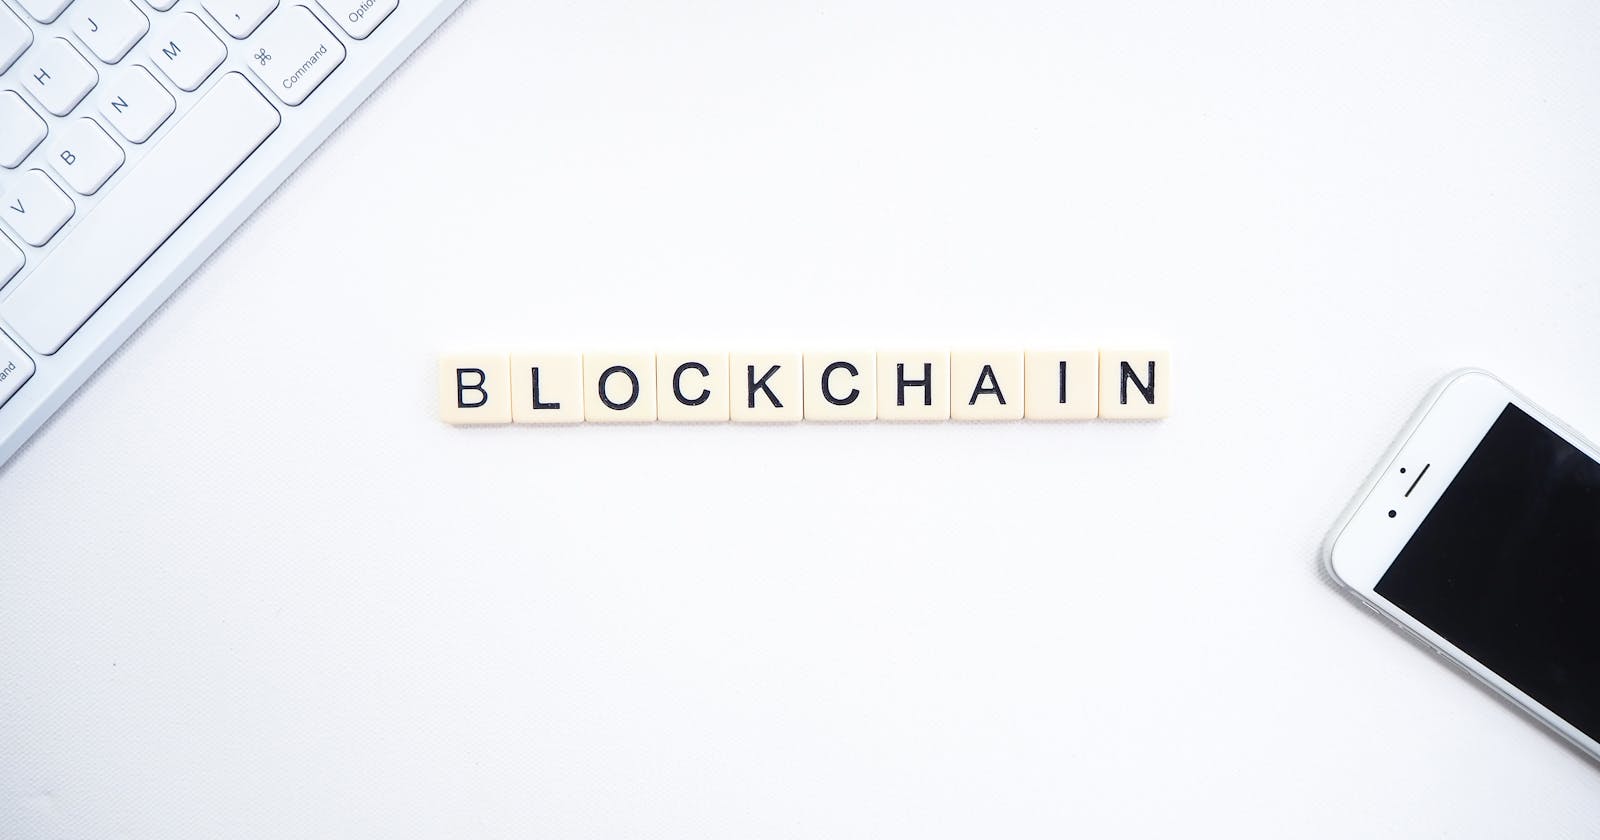 So, what's the Blockchain actually is?